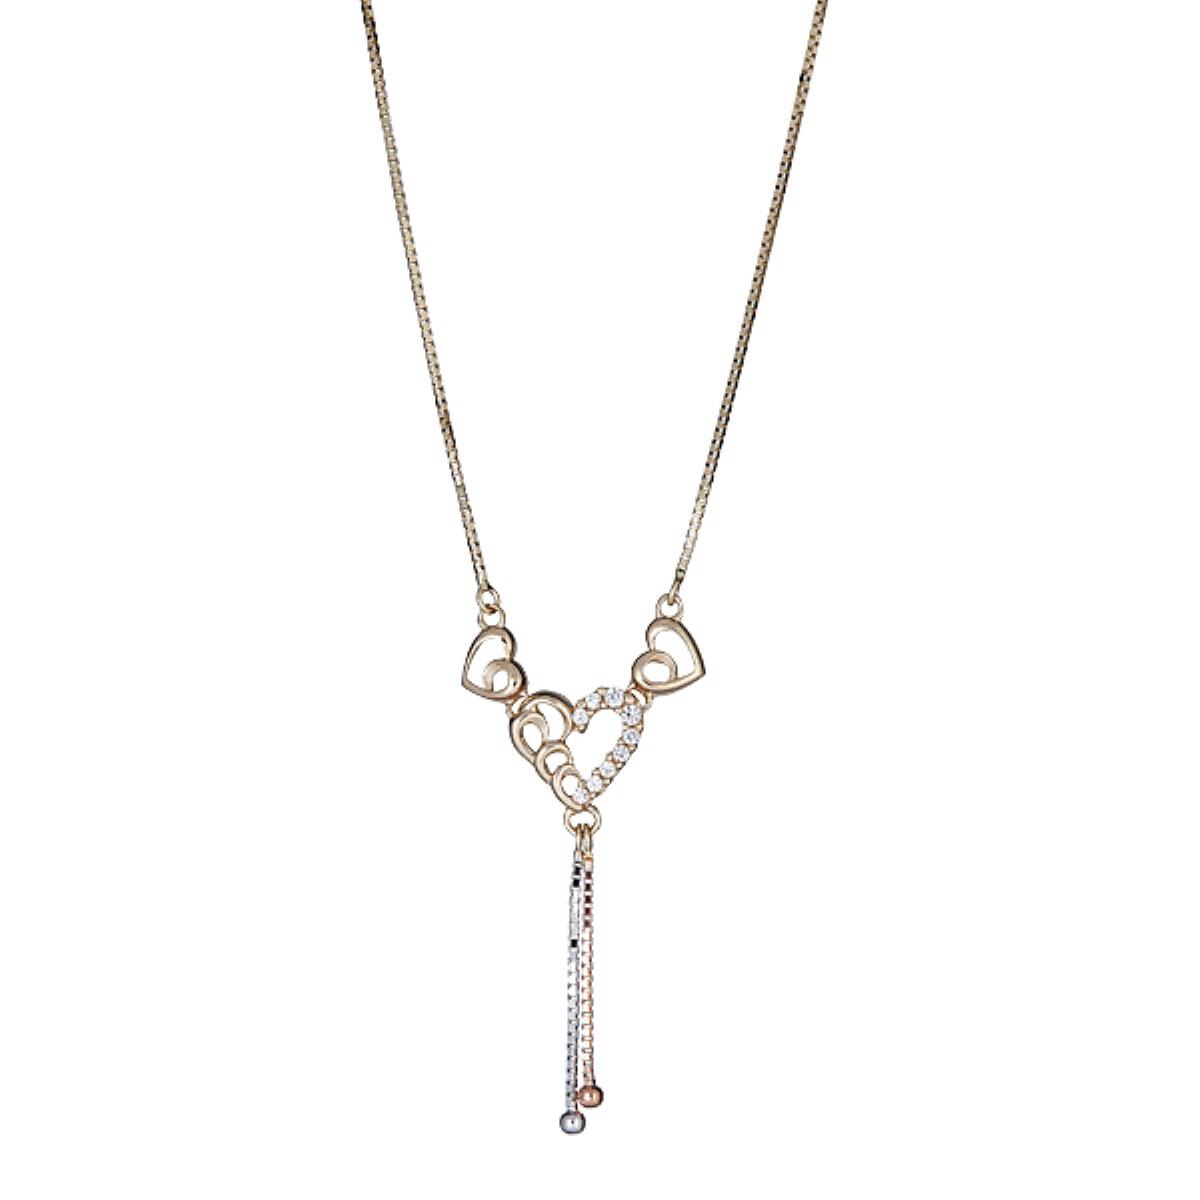 14K Tri-color Gold Heart Dangling 17" Necklace with Cubic Zirconia